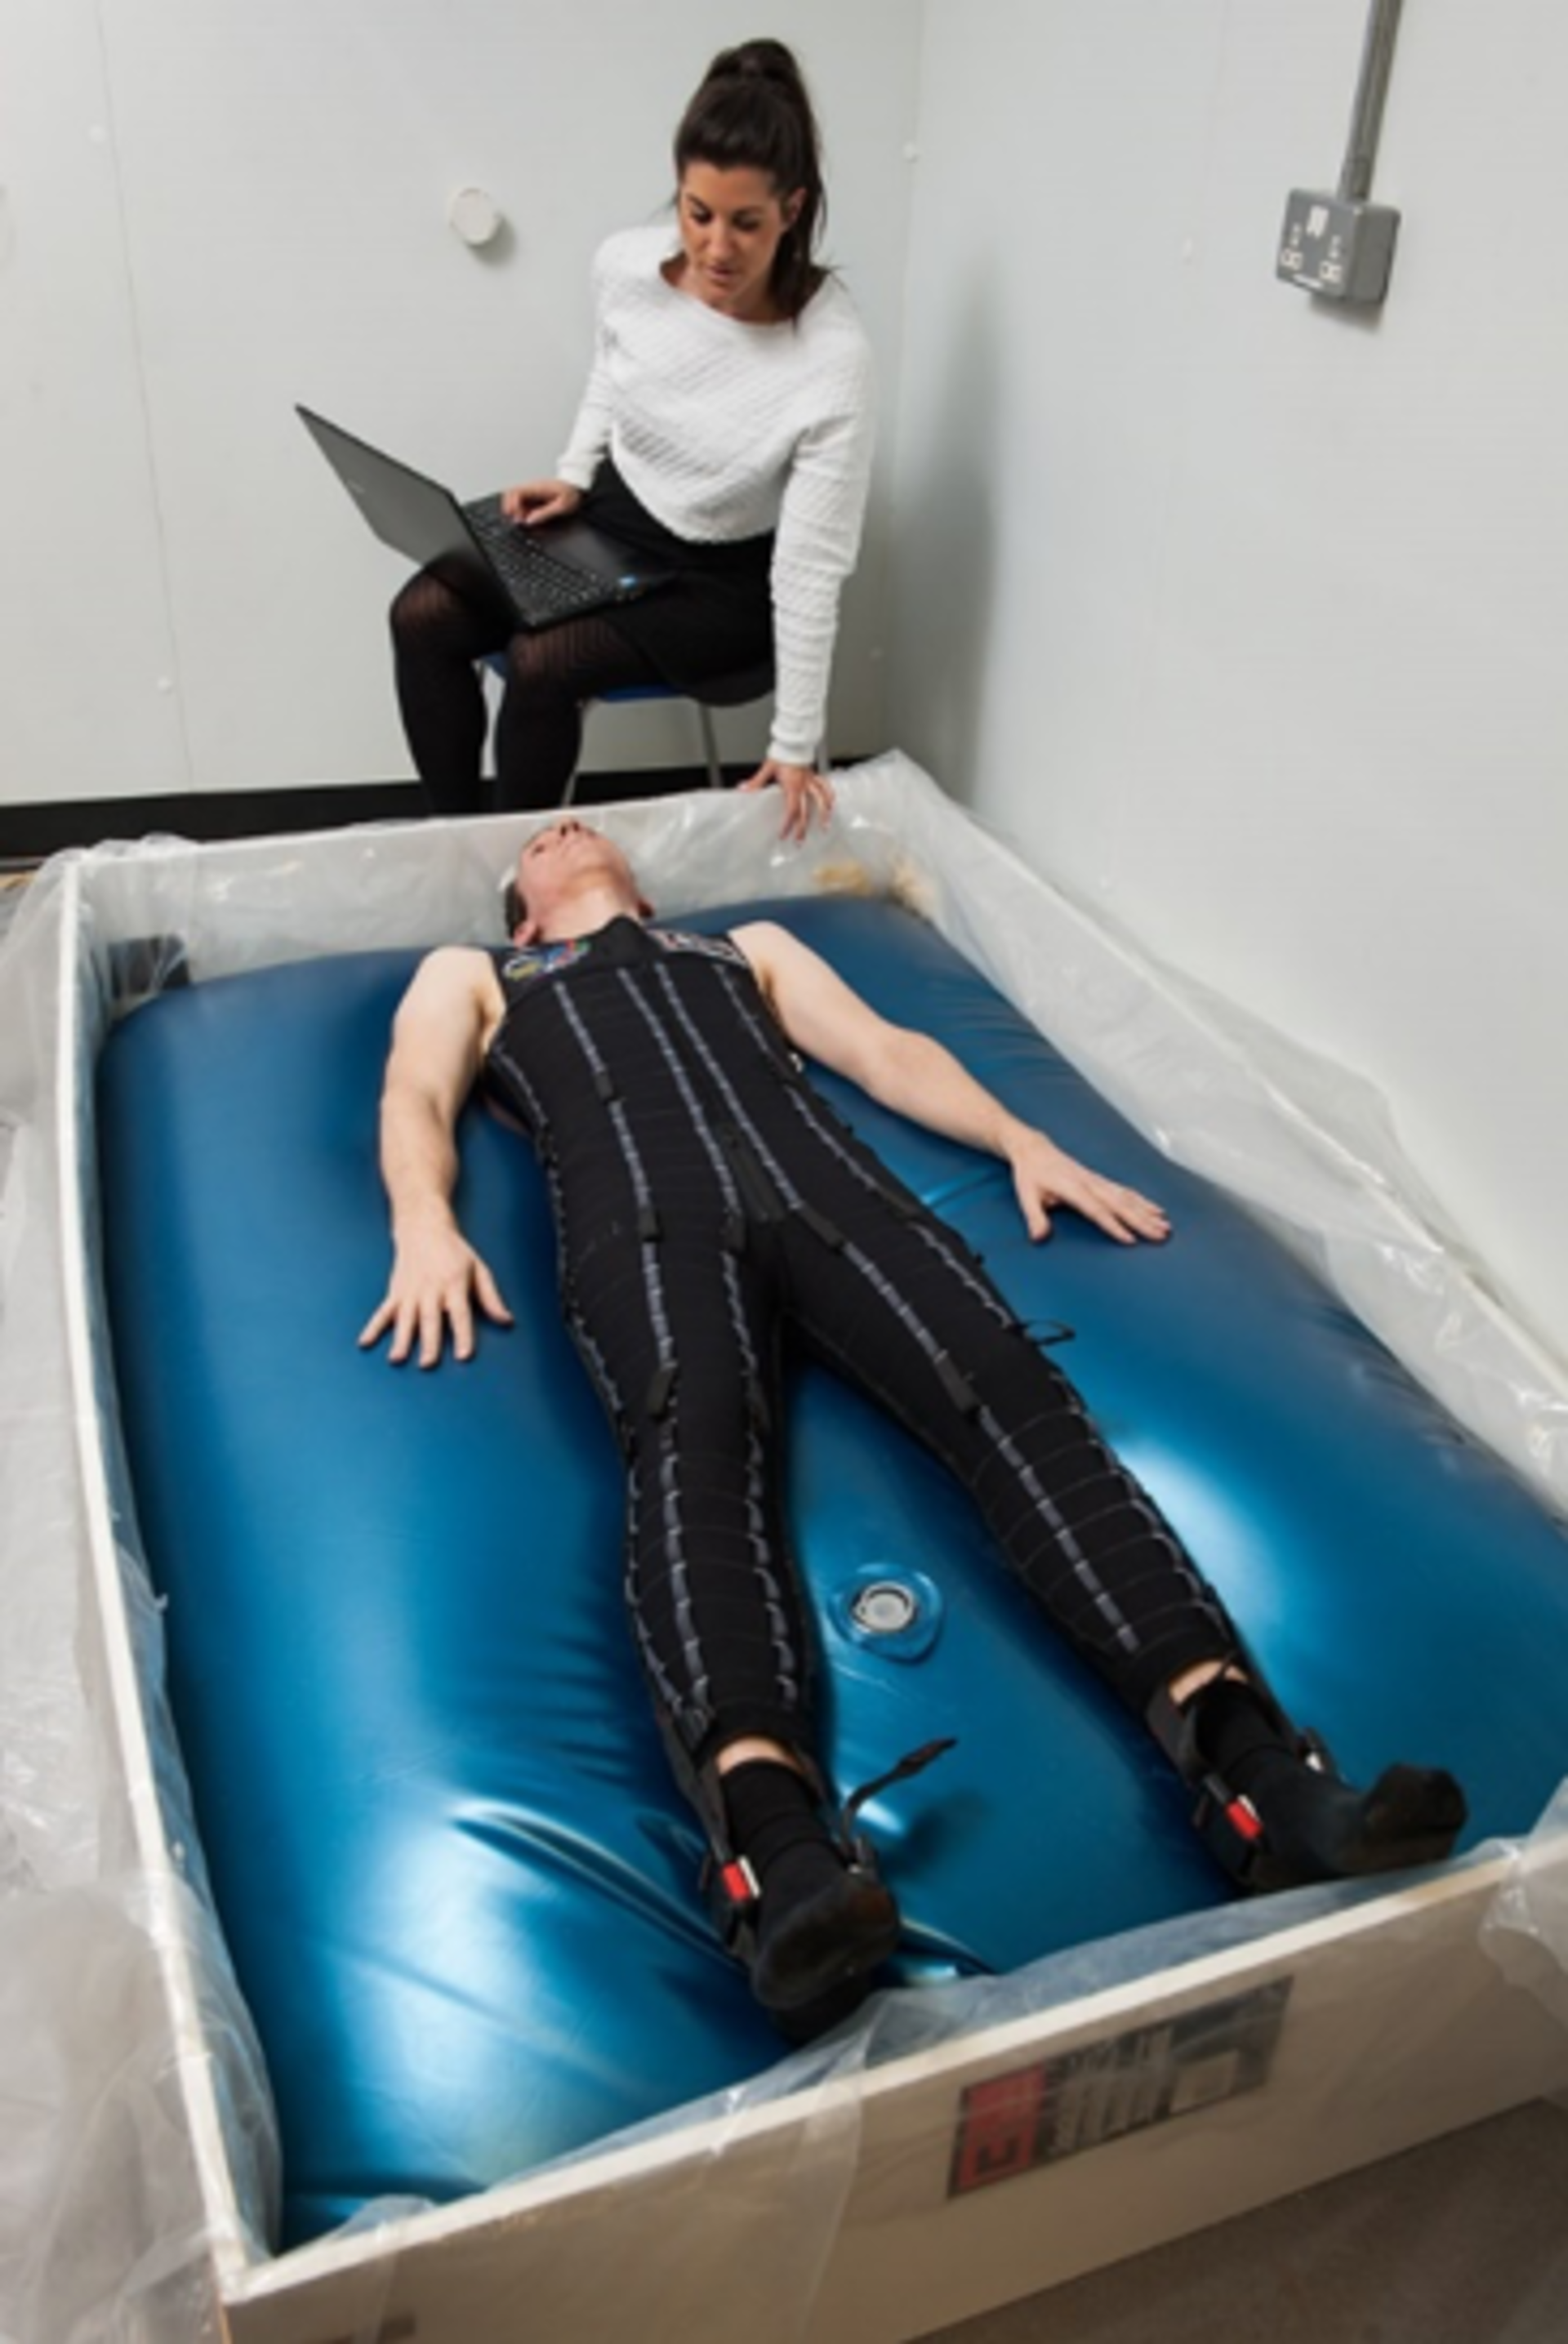 Waterbed simulates weightlessness